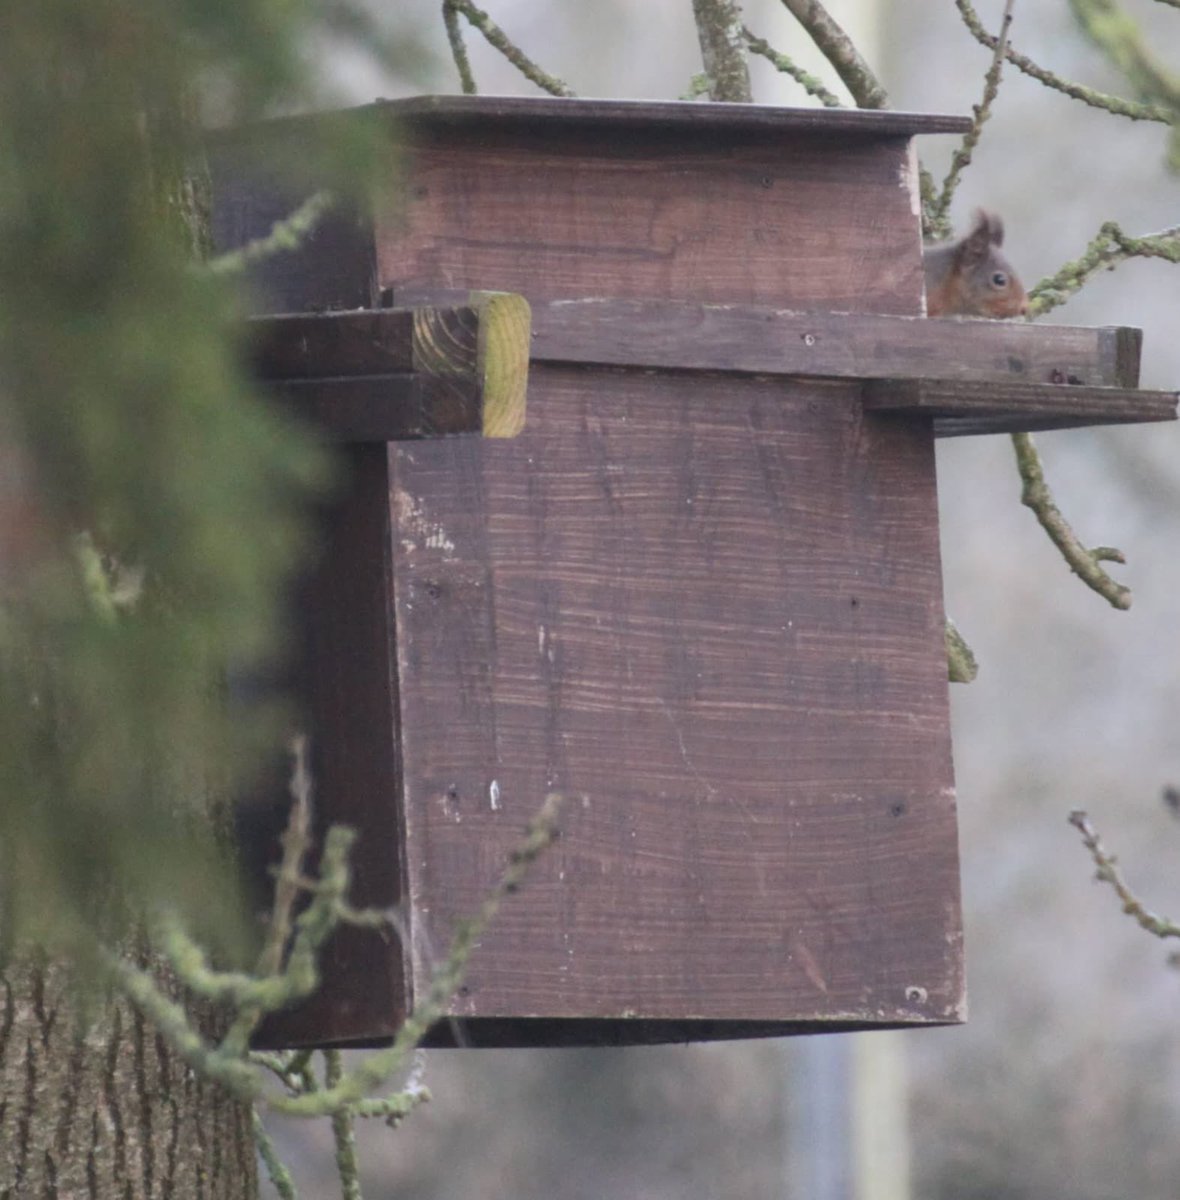 Sometimes our species work crosses over!! @peddyrmac spotted this beautiful #redsquirrel in Fermanagh checking out his #barnowl nesting box! @BarnOwlsNI @UlsterWildlife